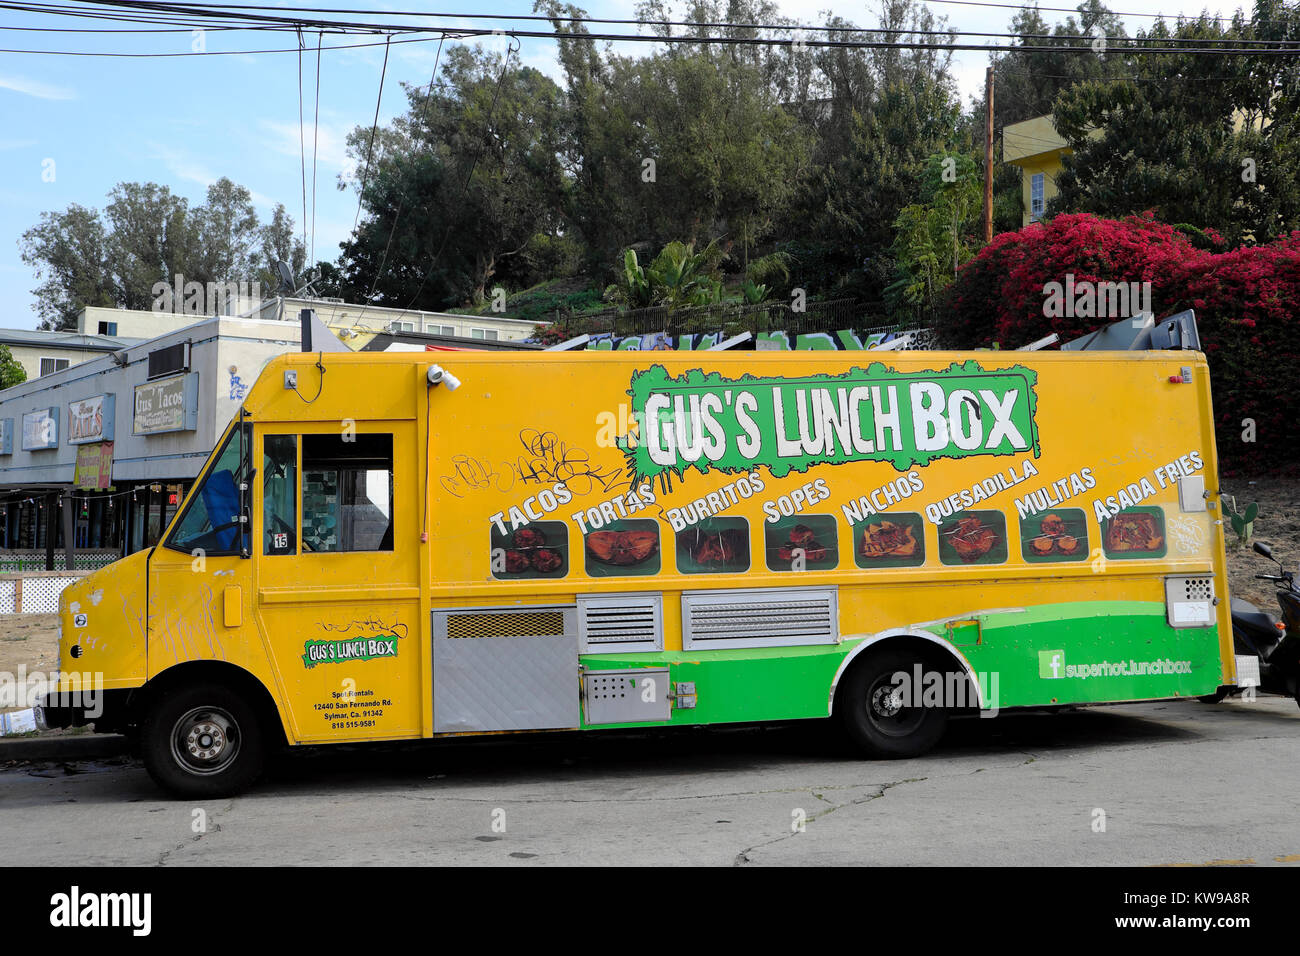 Gus's Lunch Box Mexican food cart van parked at lunchtime in the Silver Lake neighborhood of Los Angeles, California, KATHY DEWITT Stock Photo